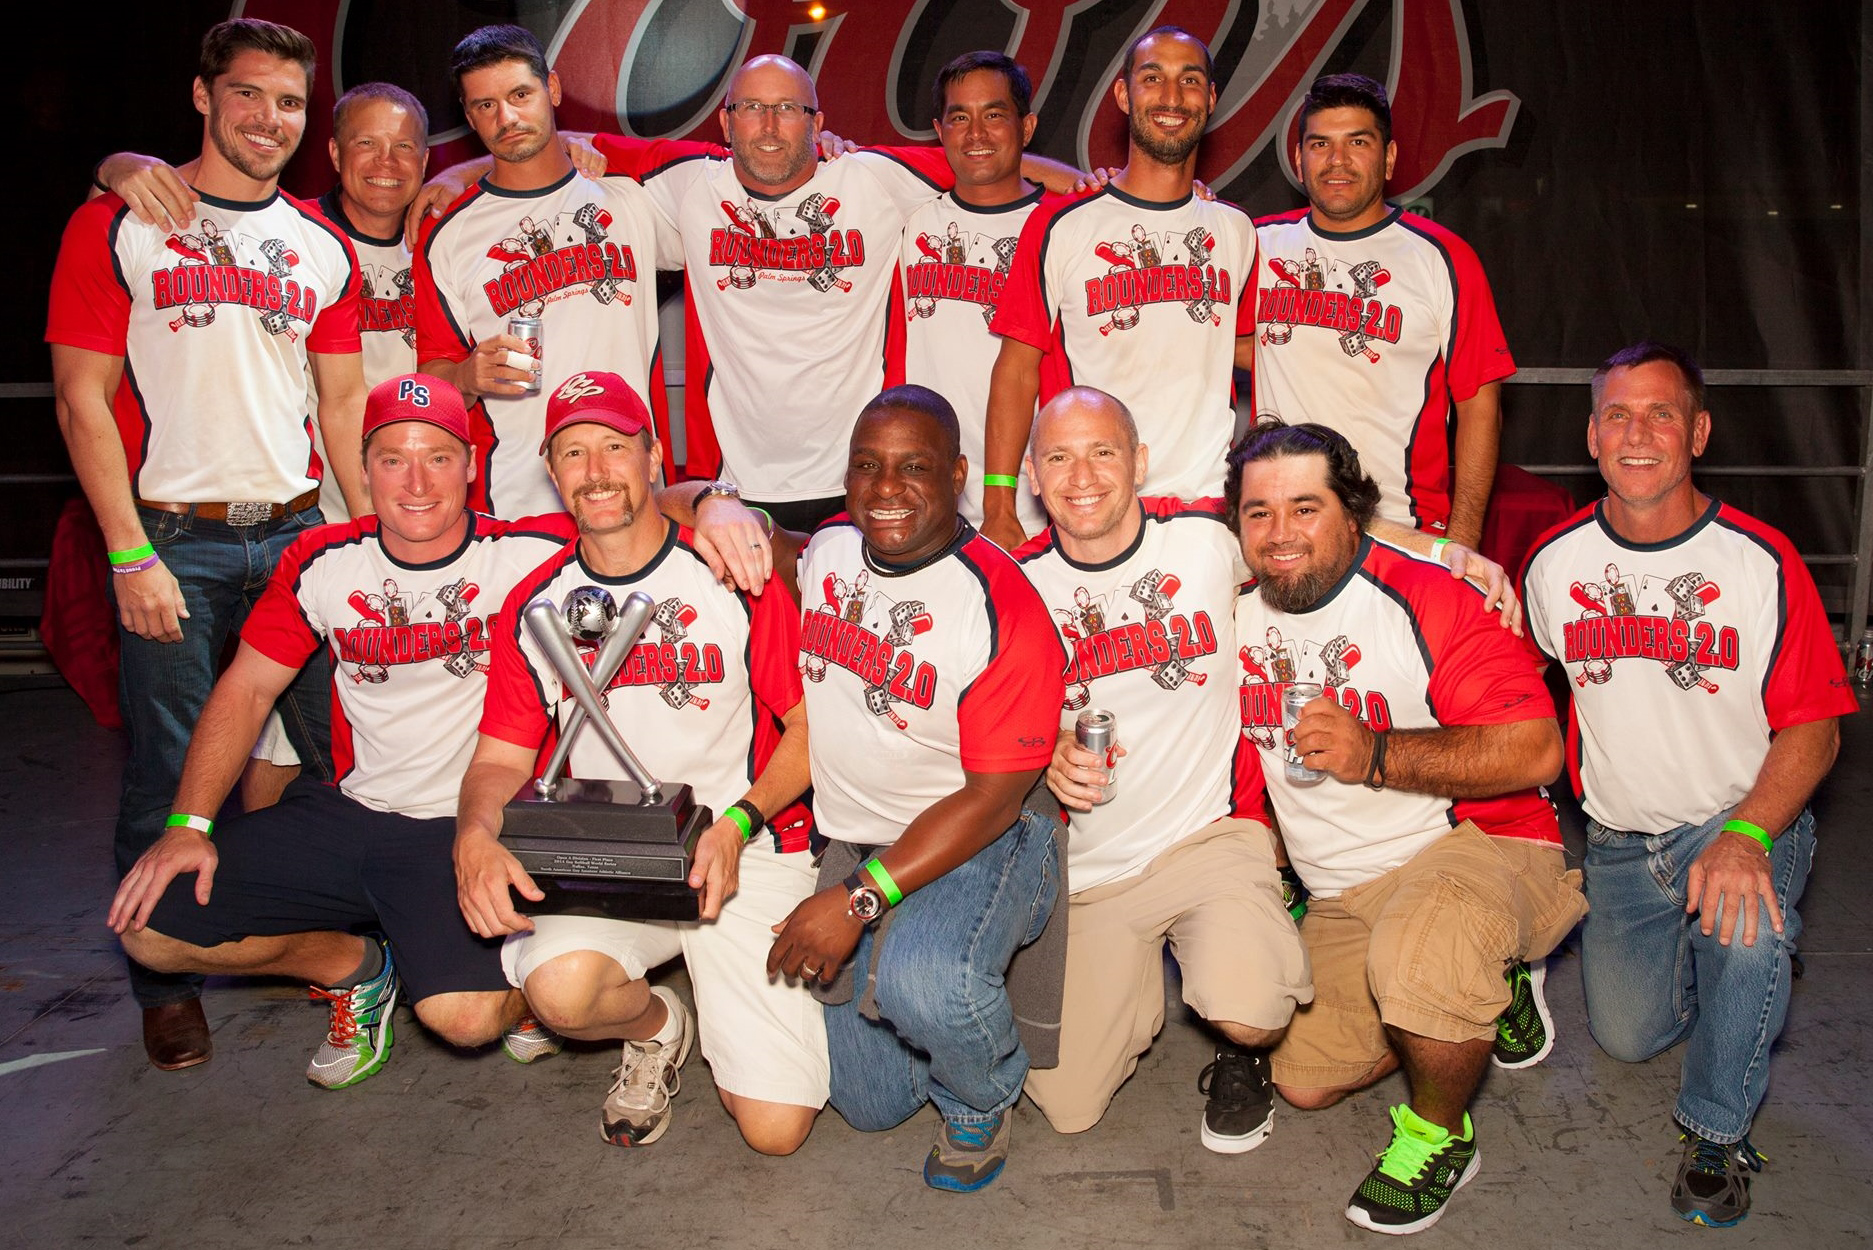 Nissan partners with North American Gay Amateur Athletic Alliance (2014 “A” Division Champions from Palm Springs, CA)